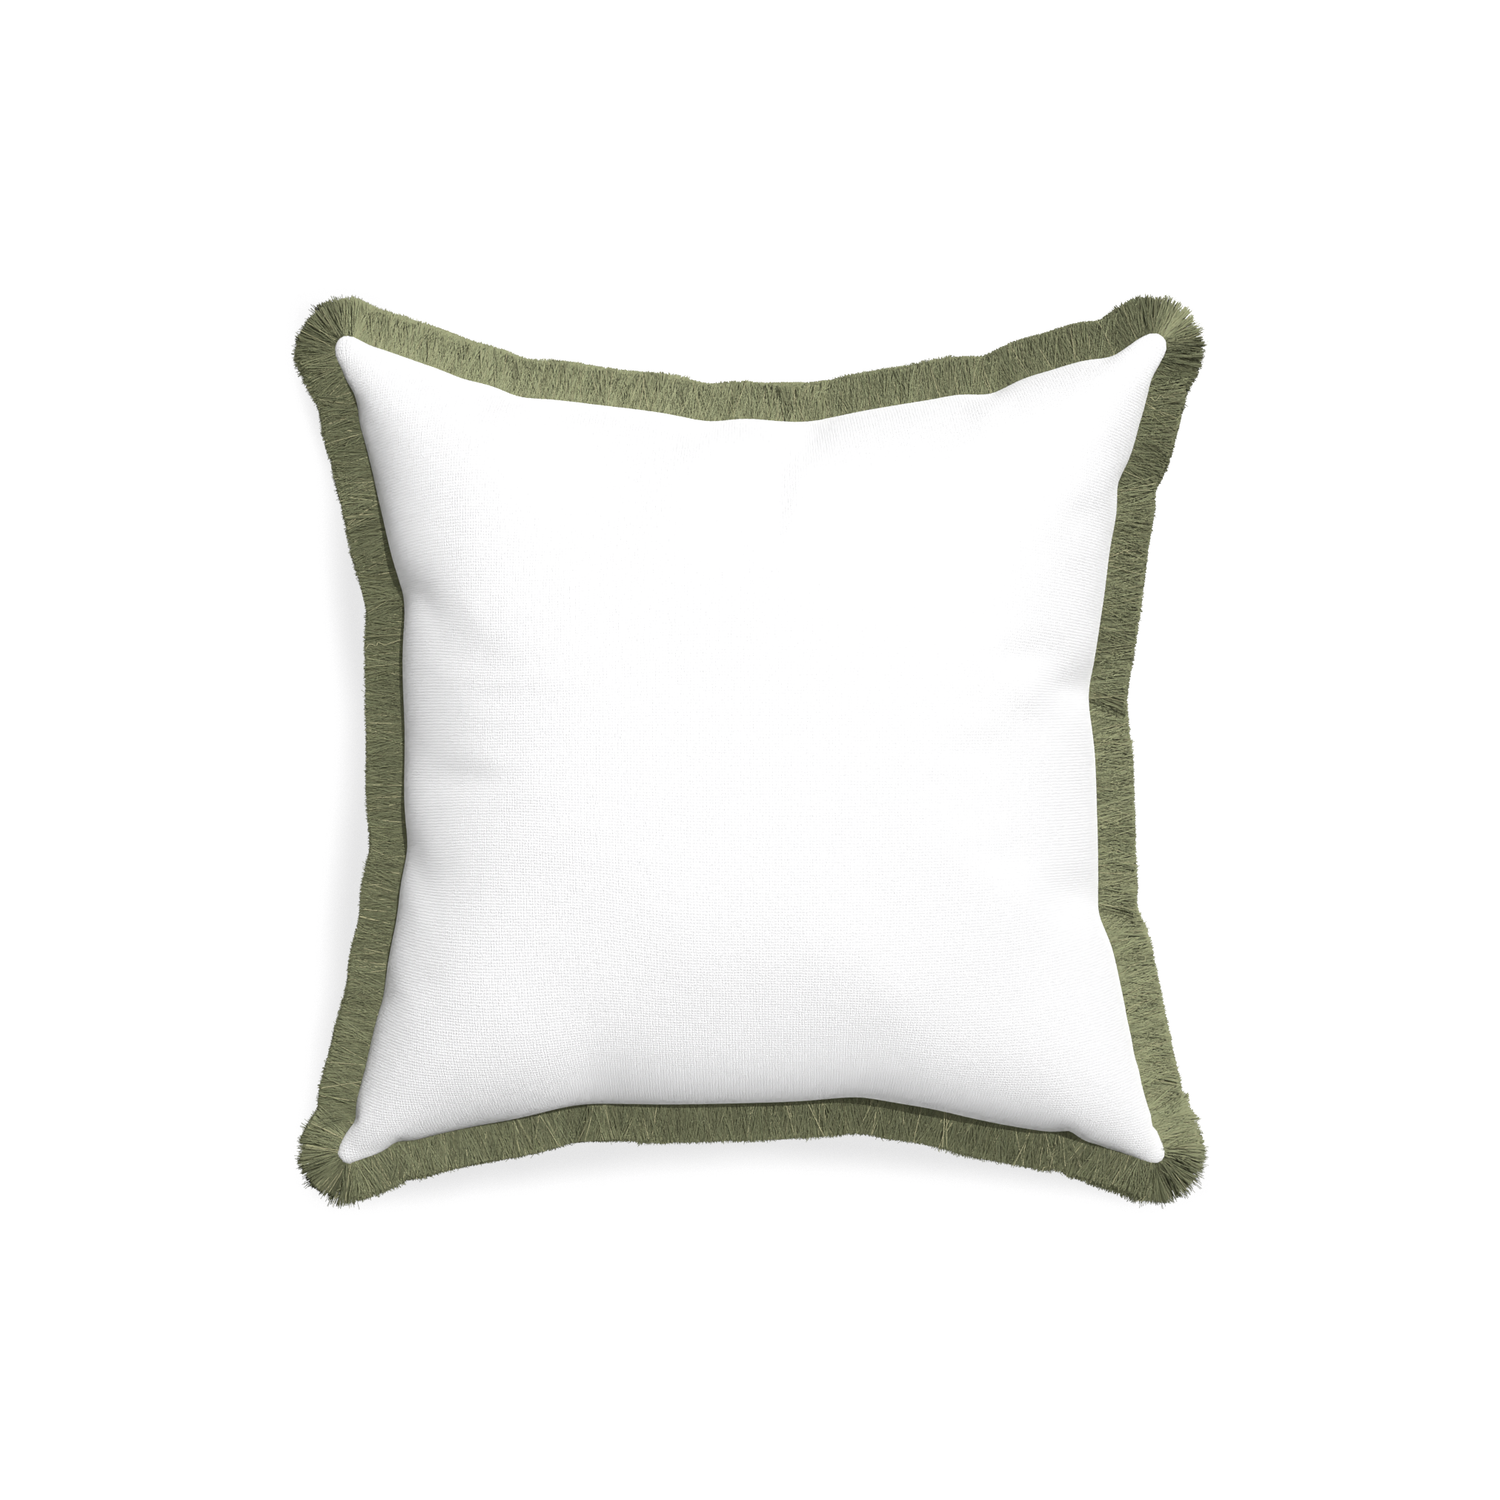 18-square snow custom white cottonpillow with sage fringe on white background